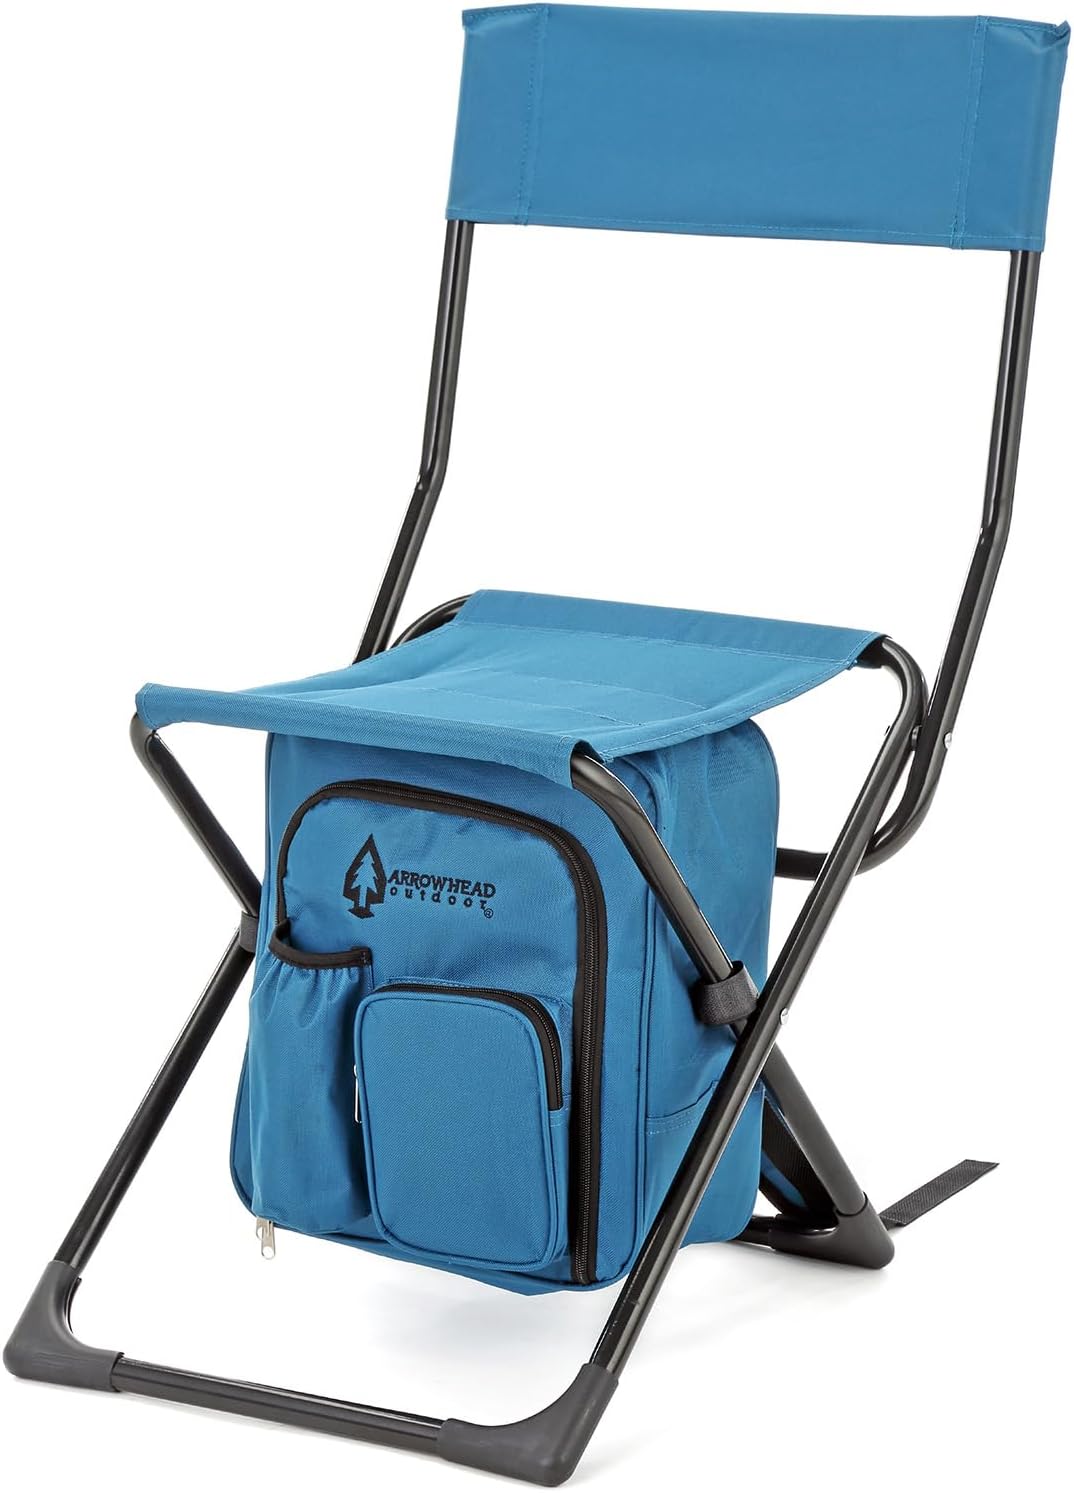 Arrowhead Outdoor Multi-function 3-in-1 Compact Fishing Chair: Backpack, Stool & Insulated Cooler, w/ Bottle Holder & Storage Bag, External Pockets, B